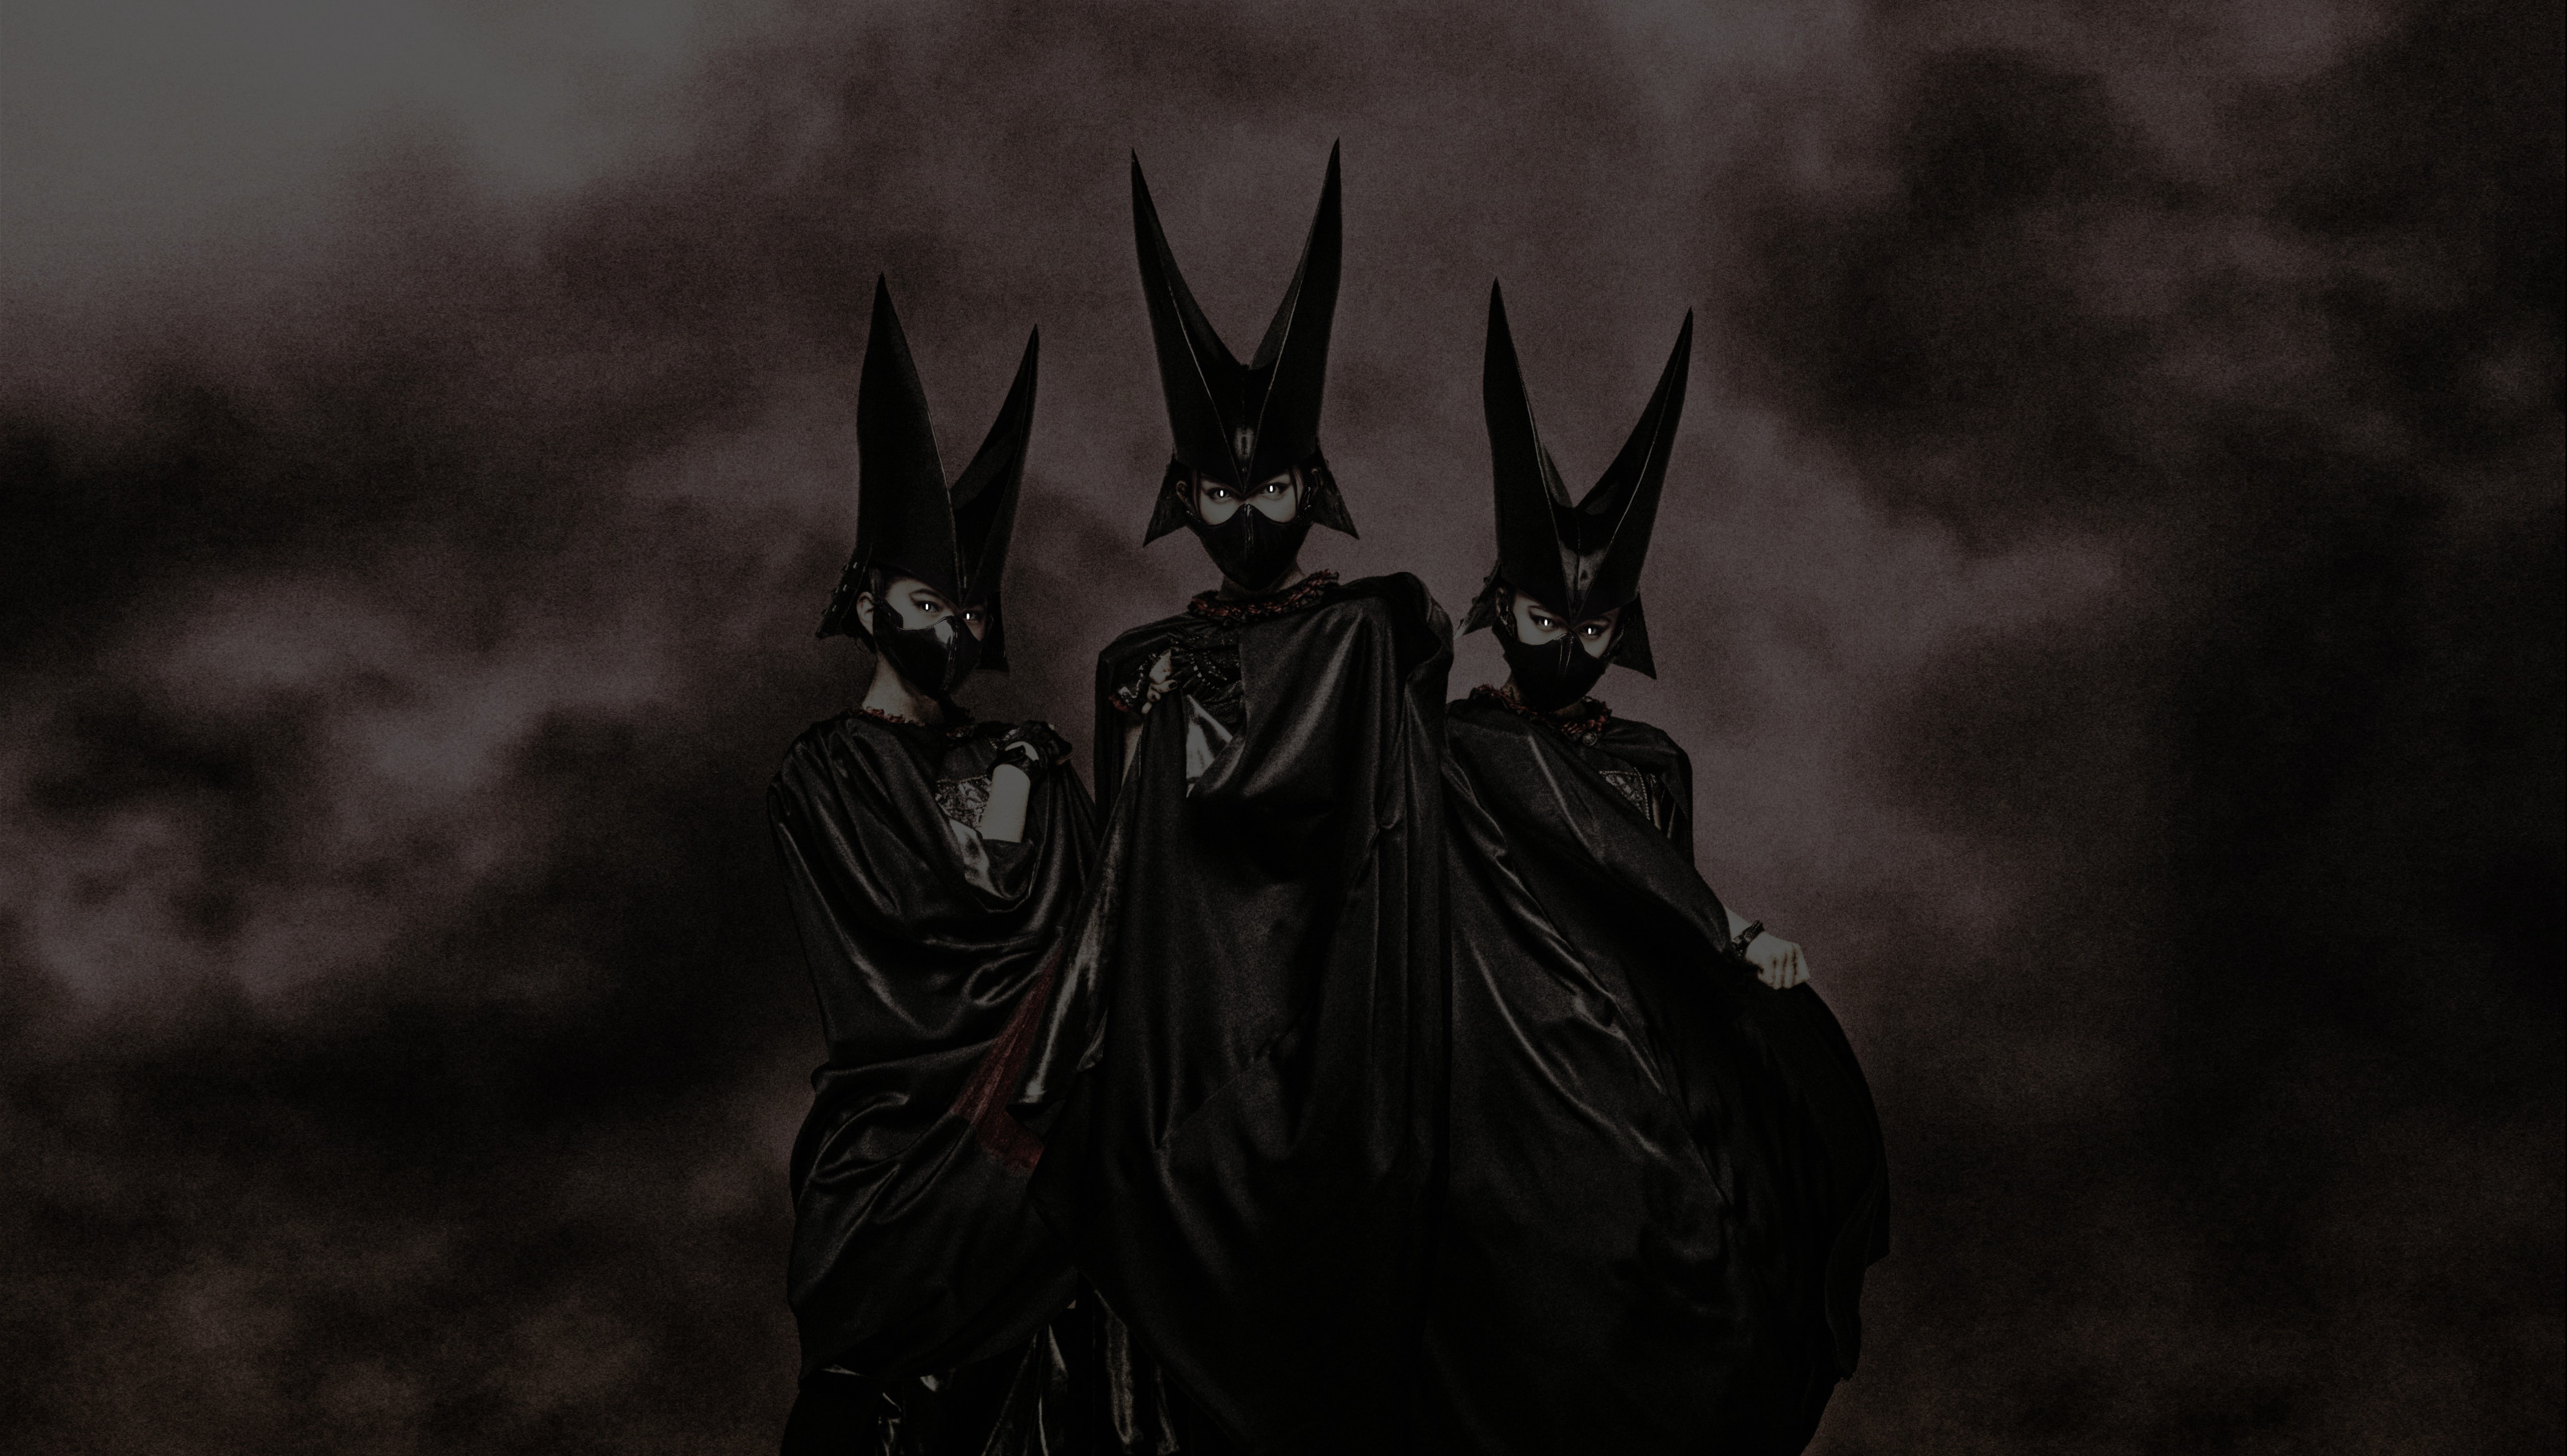 3200x1815 ImagesI took an official Babymetal wallpaper and made it less "cute". I'm  kind of into it.